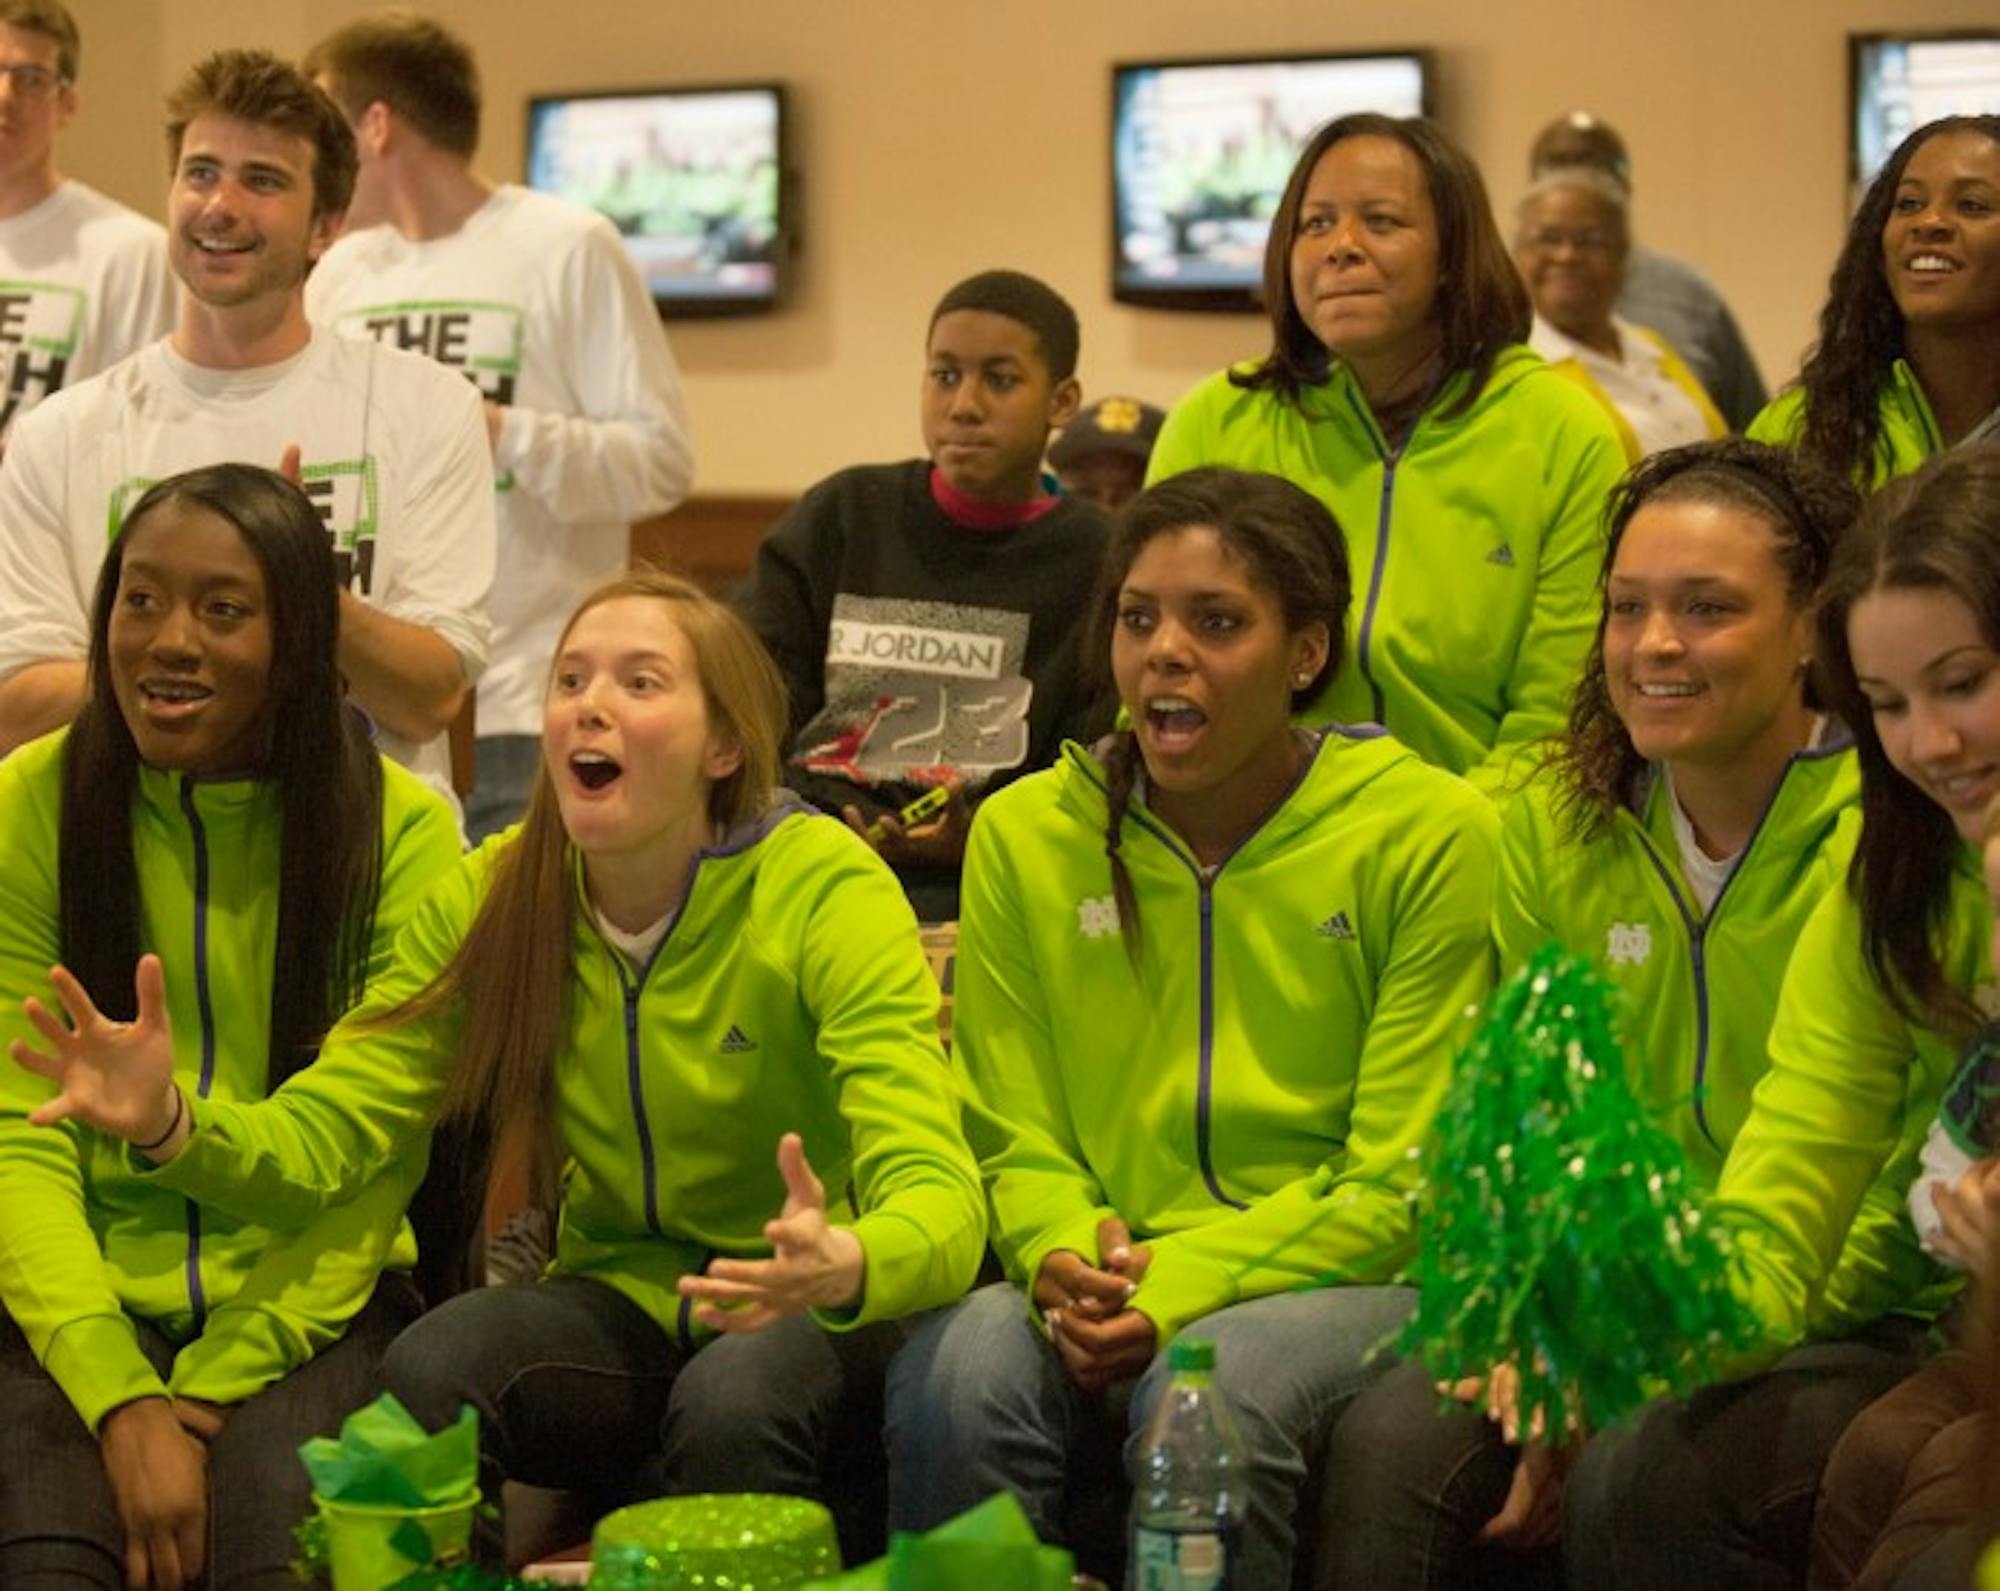 Members of the Notre Dame women's basketball team react to the announcement of their No. 1 seed in the NCAA tournament Monday.